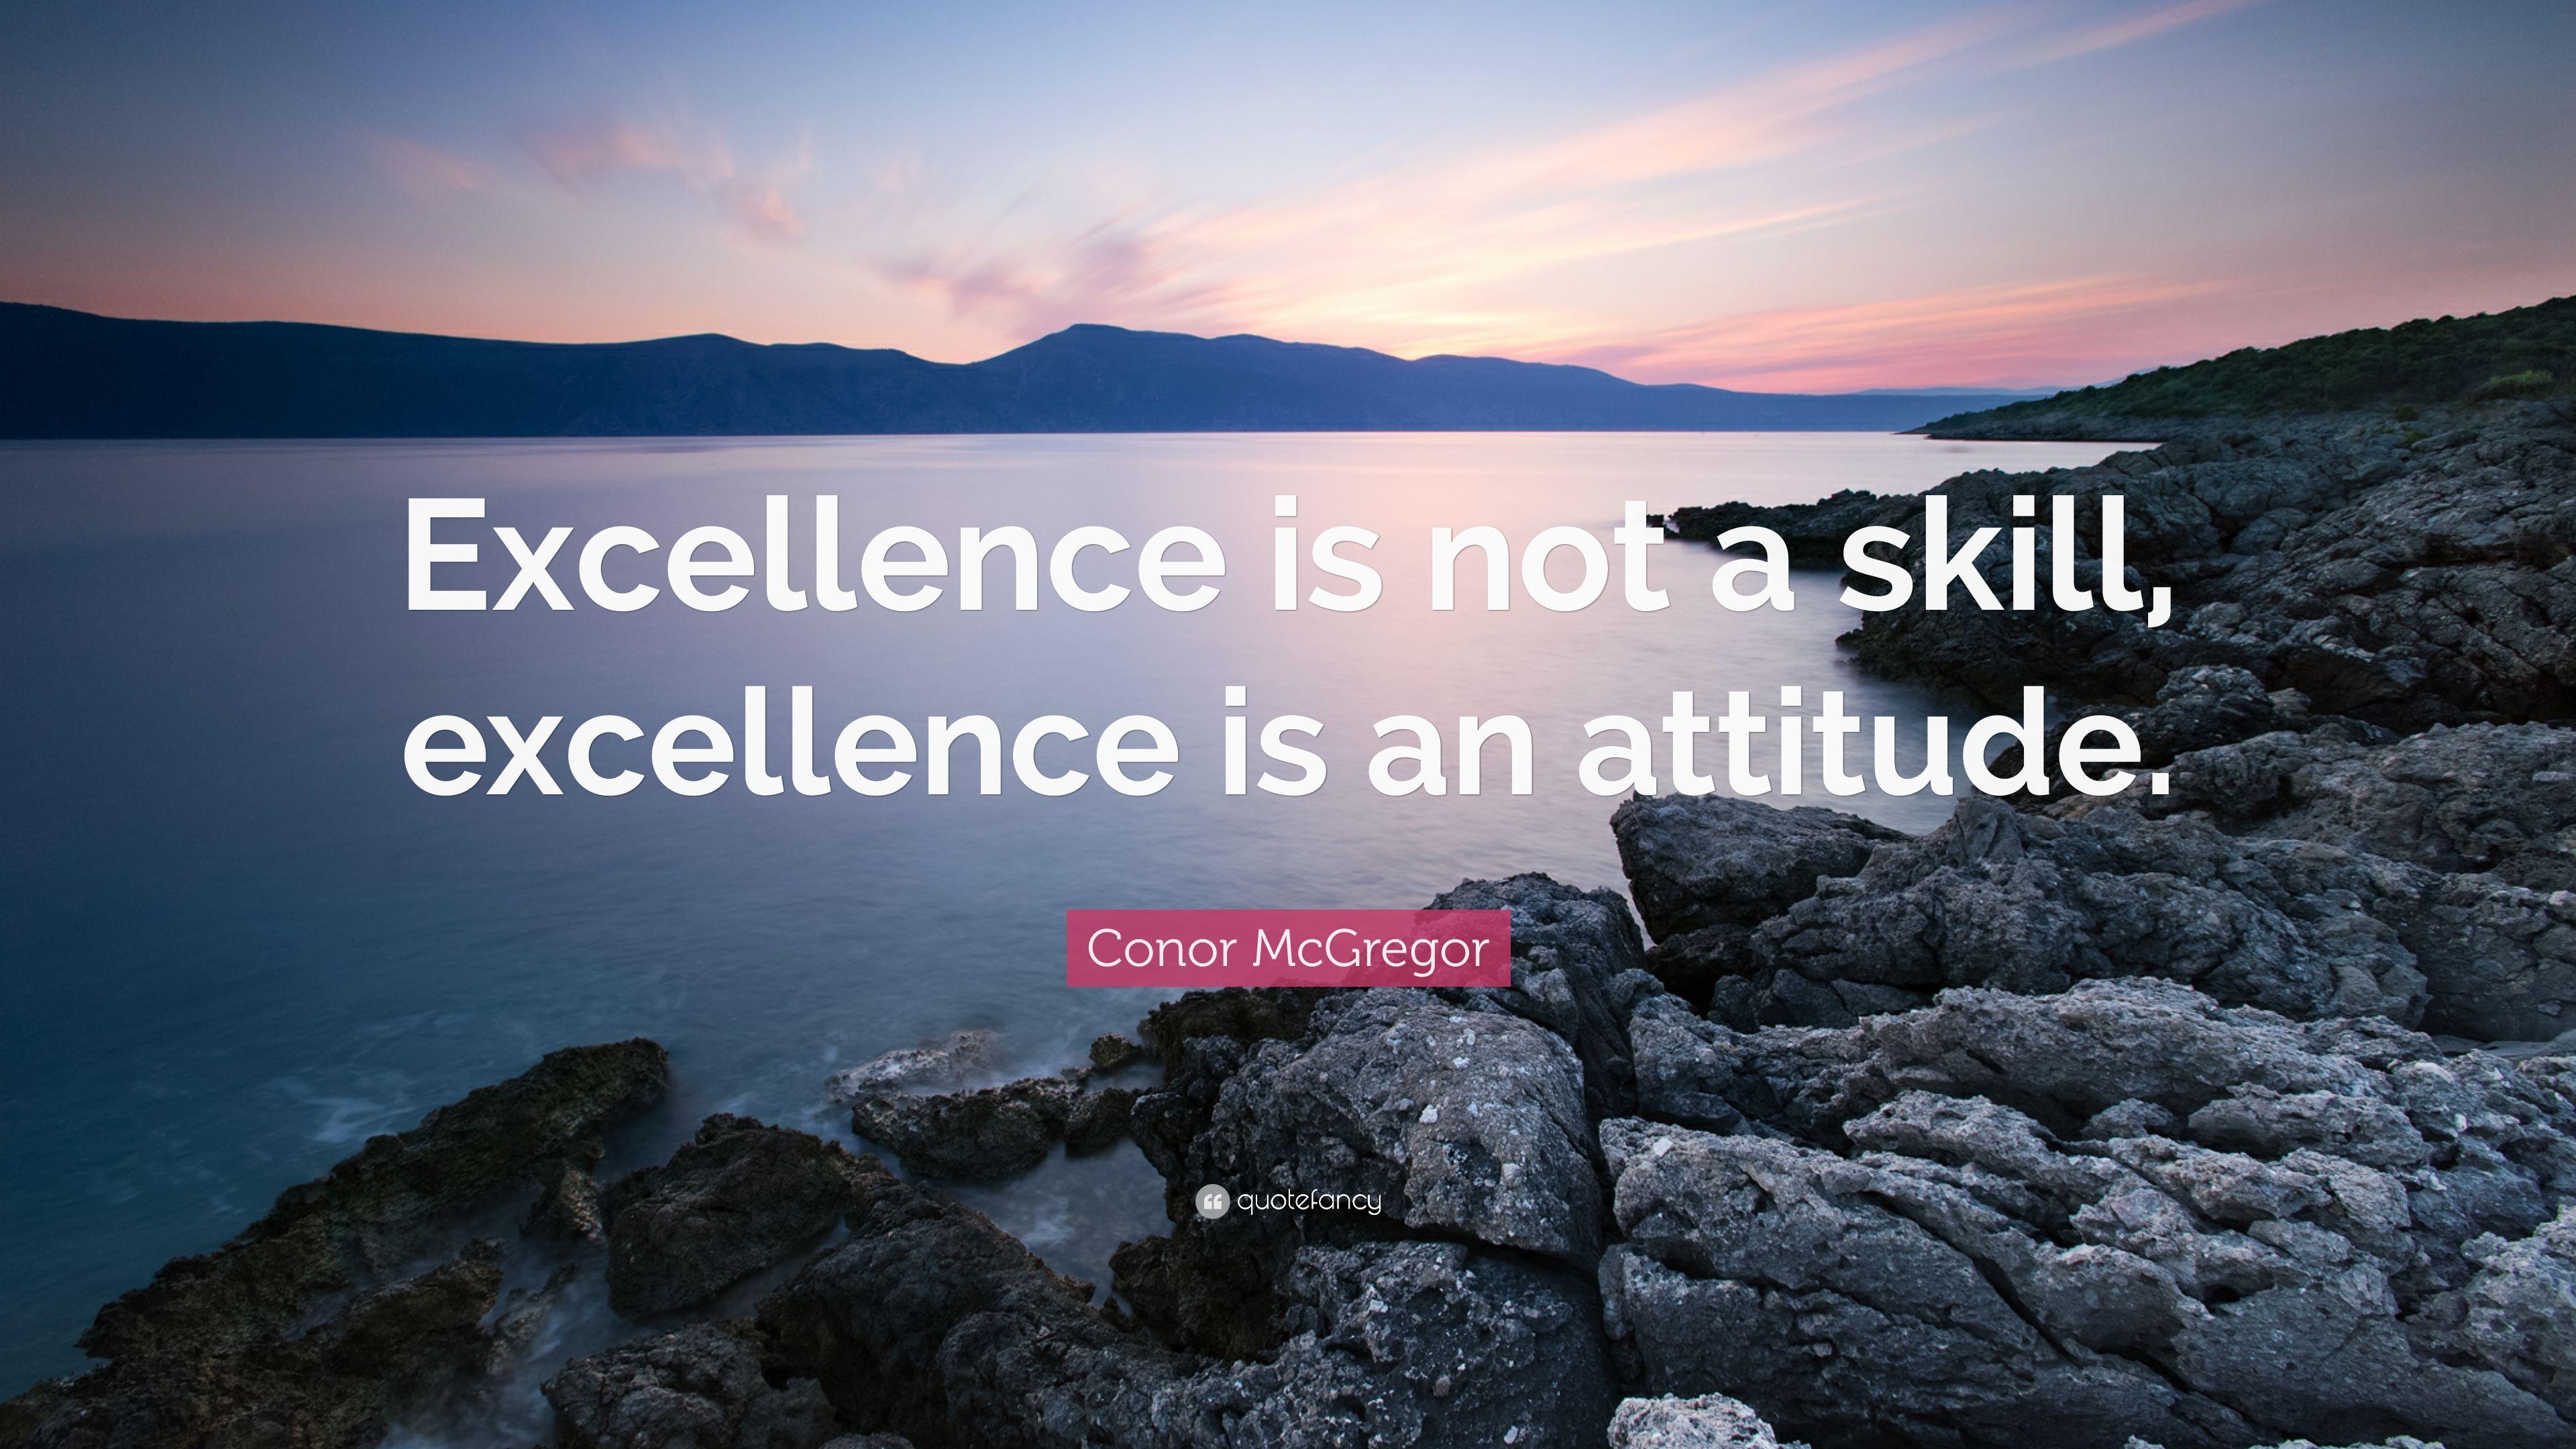 Conor McGregor Quote: “Excellence is not a skill, excellence